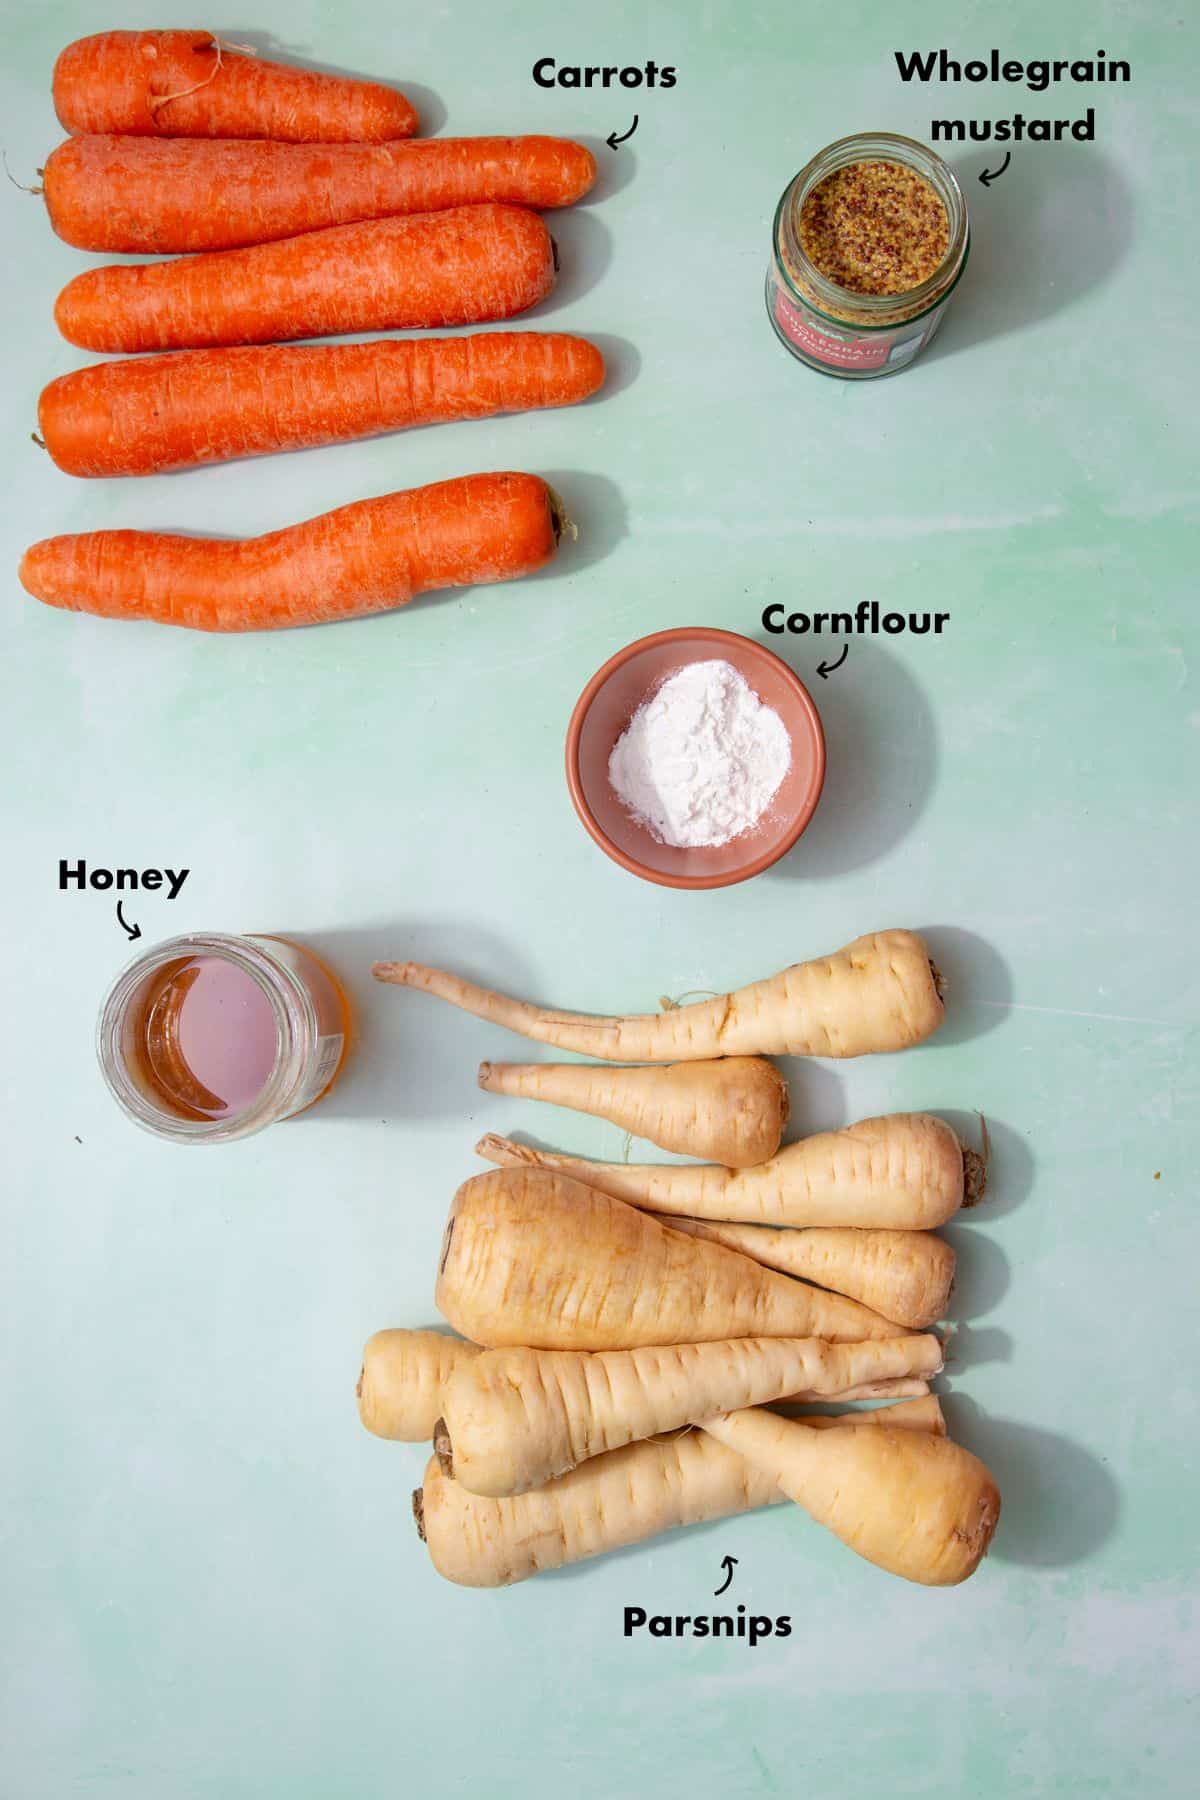 Ingredients to make a carrots and parsnips recipe recipe laid out on aple blue back ground and labelled.